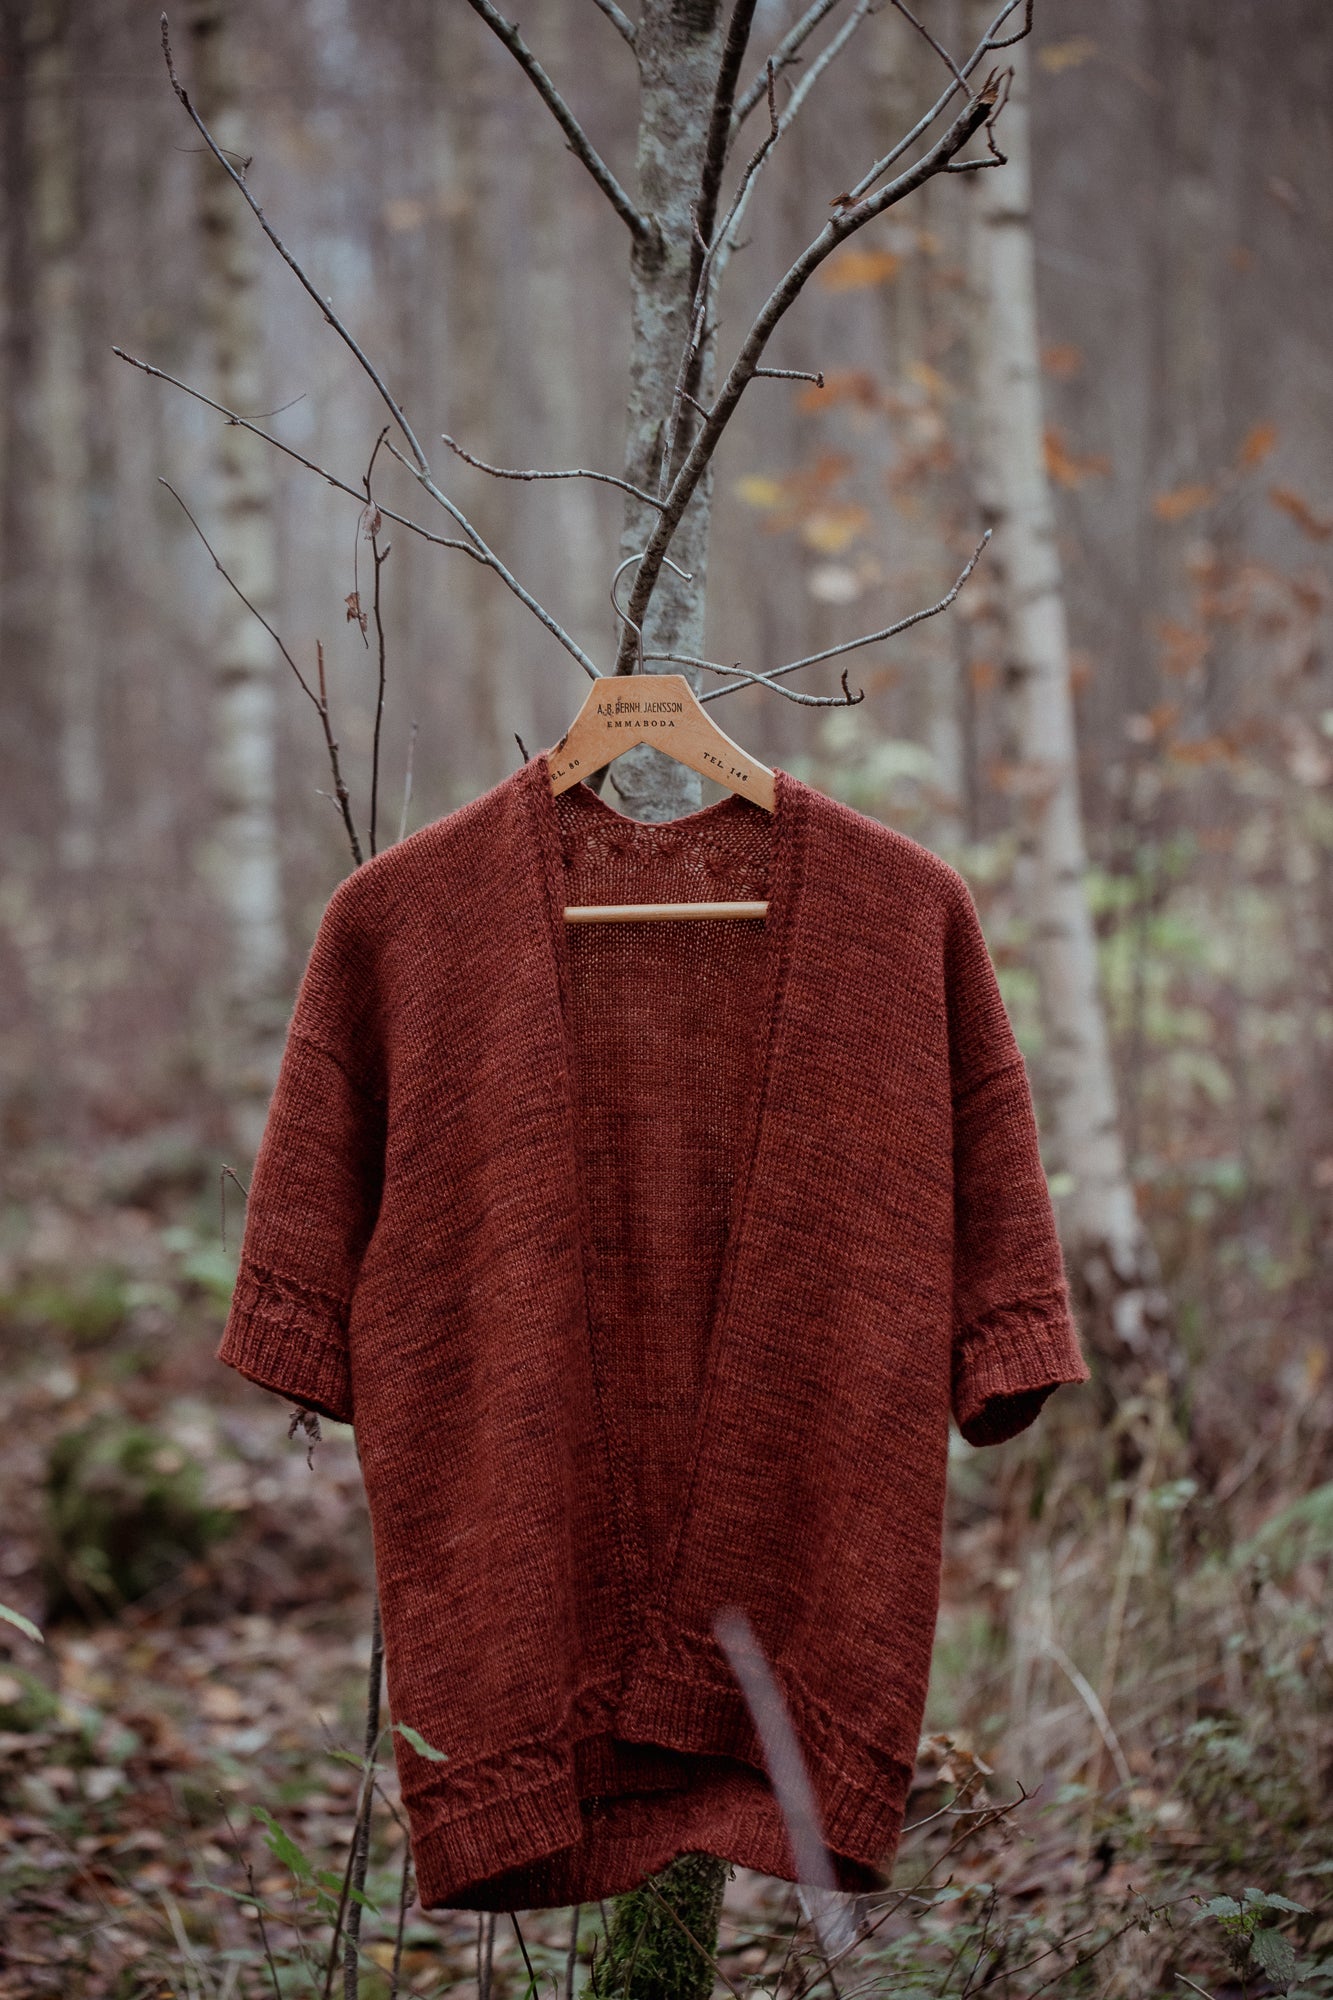 Laine Publishing - Observations: Knits and Essays from the Forest by Lotta H Löthgren